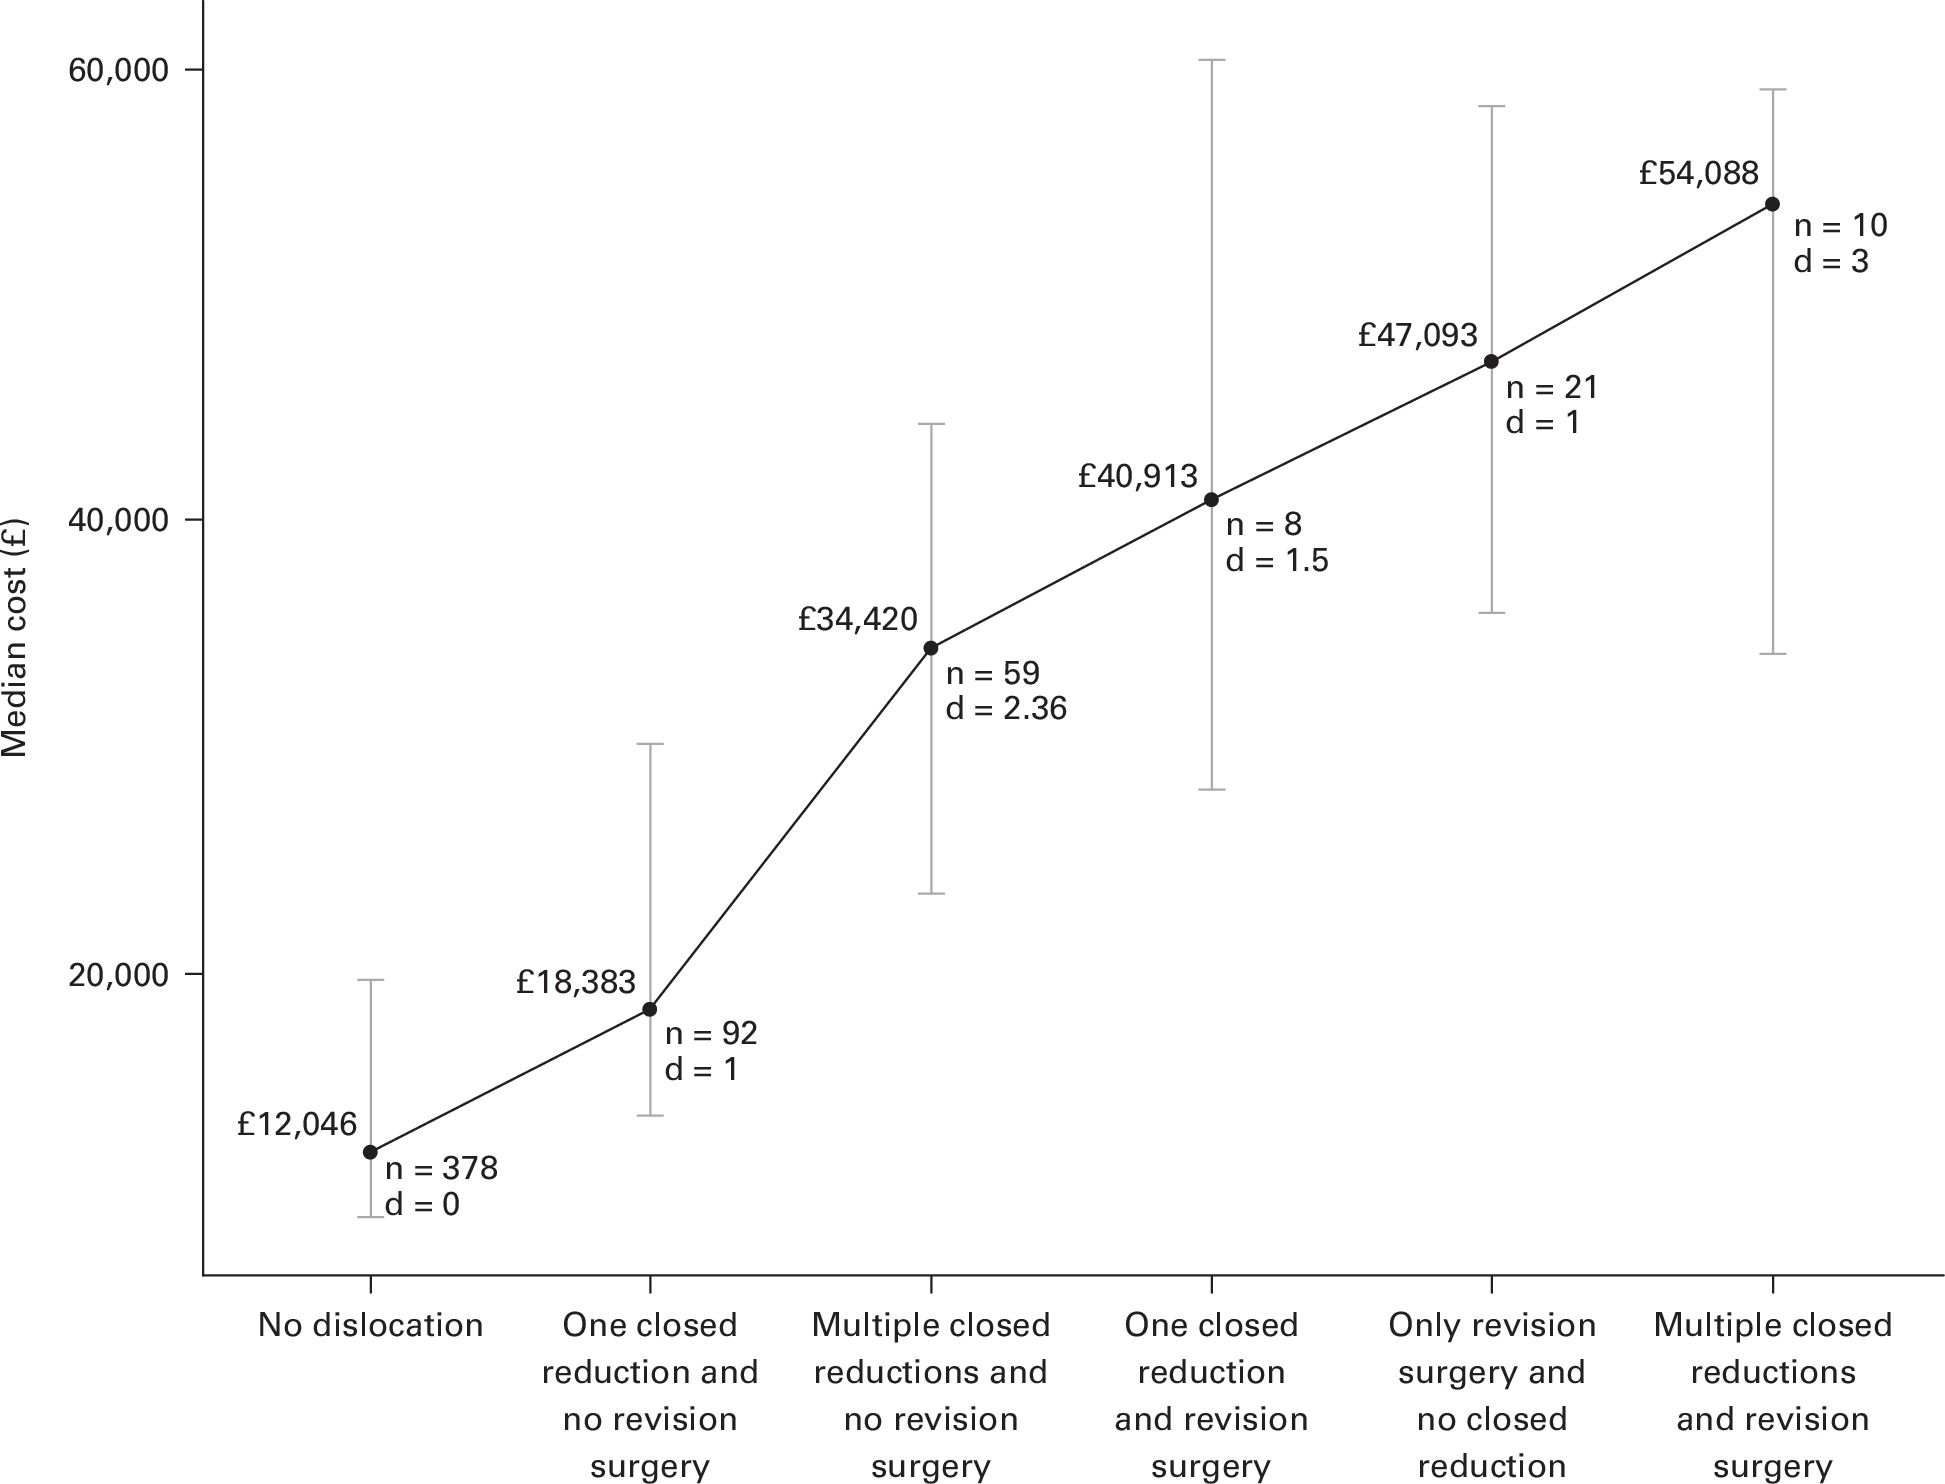 Fig. 4 
            Overall two-year direct medical costs for matched Clinical Practice Research Datalink primary total hip arthroplasty patients without a hip dislocation and with hip dislocation according to treatments received. Error bars indicate the interquartile range. n = number of patients per category, d = average number of dislocations per category.
          